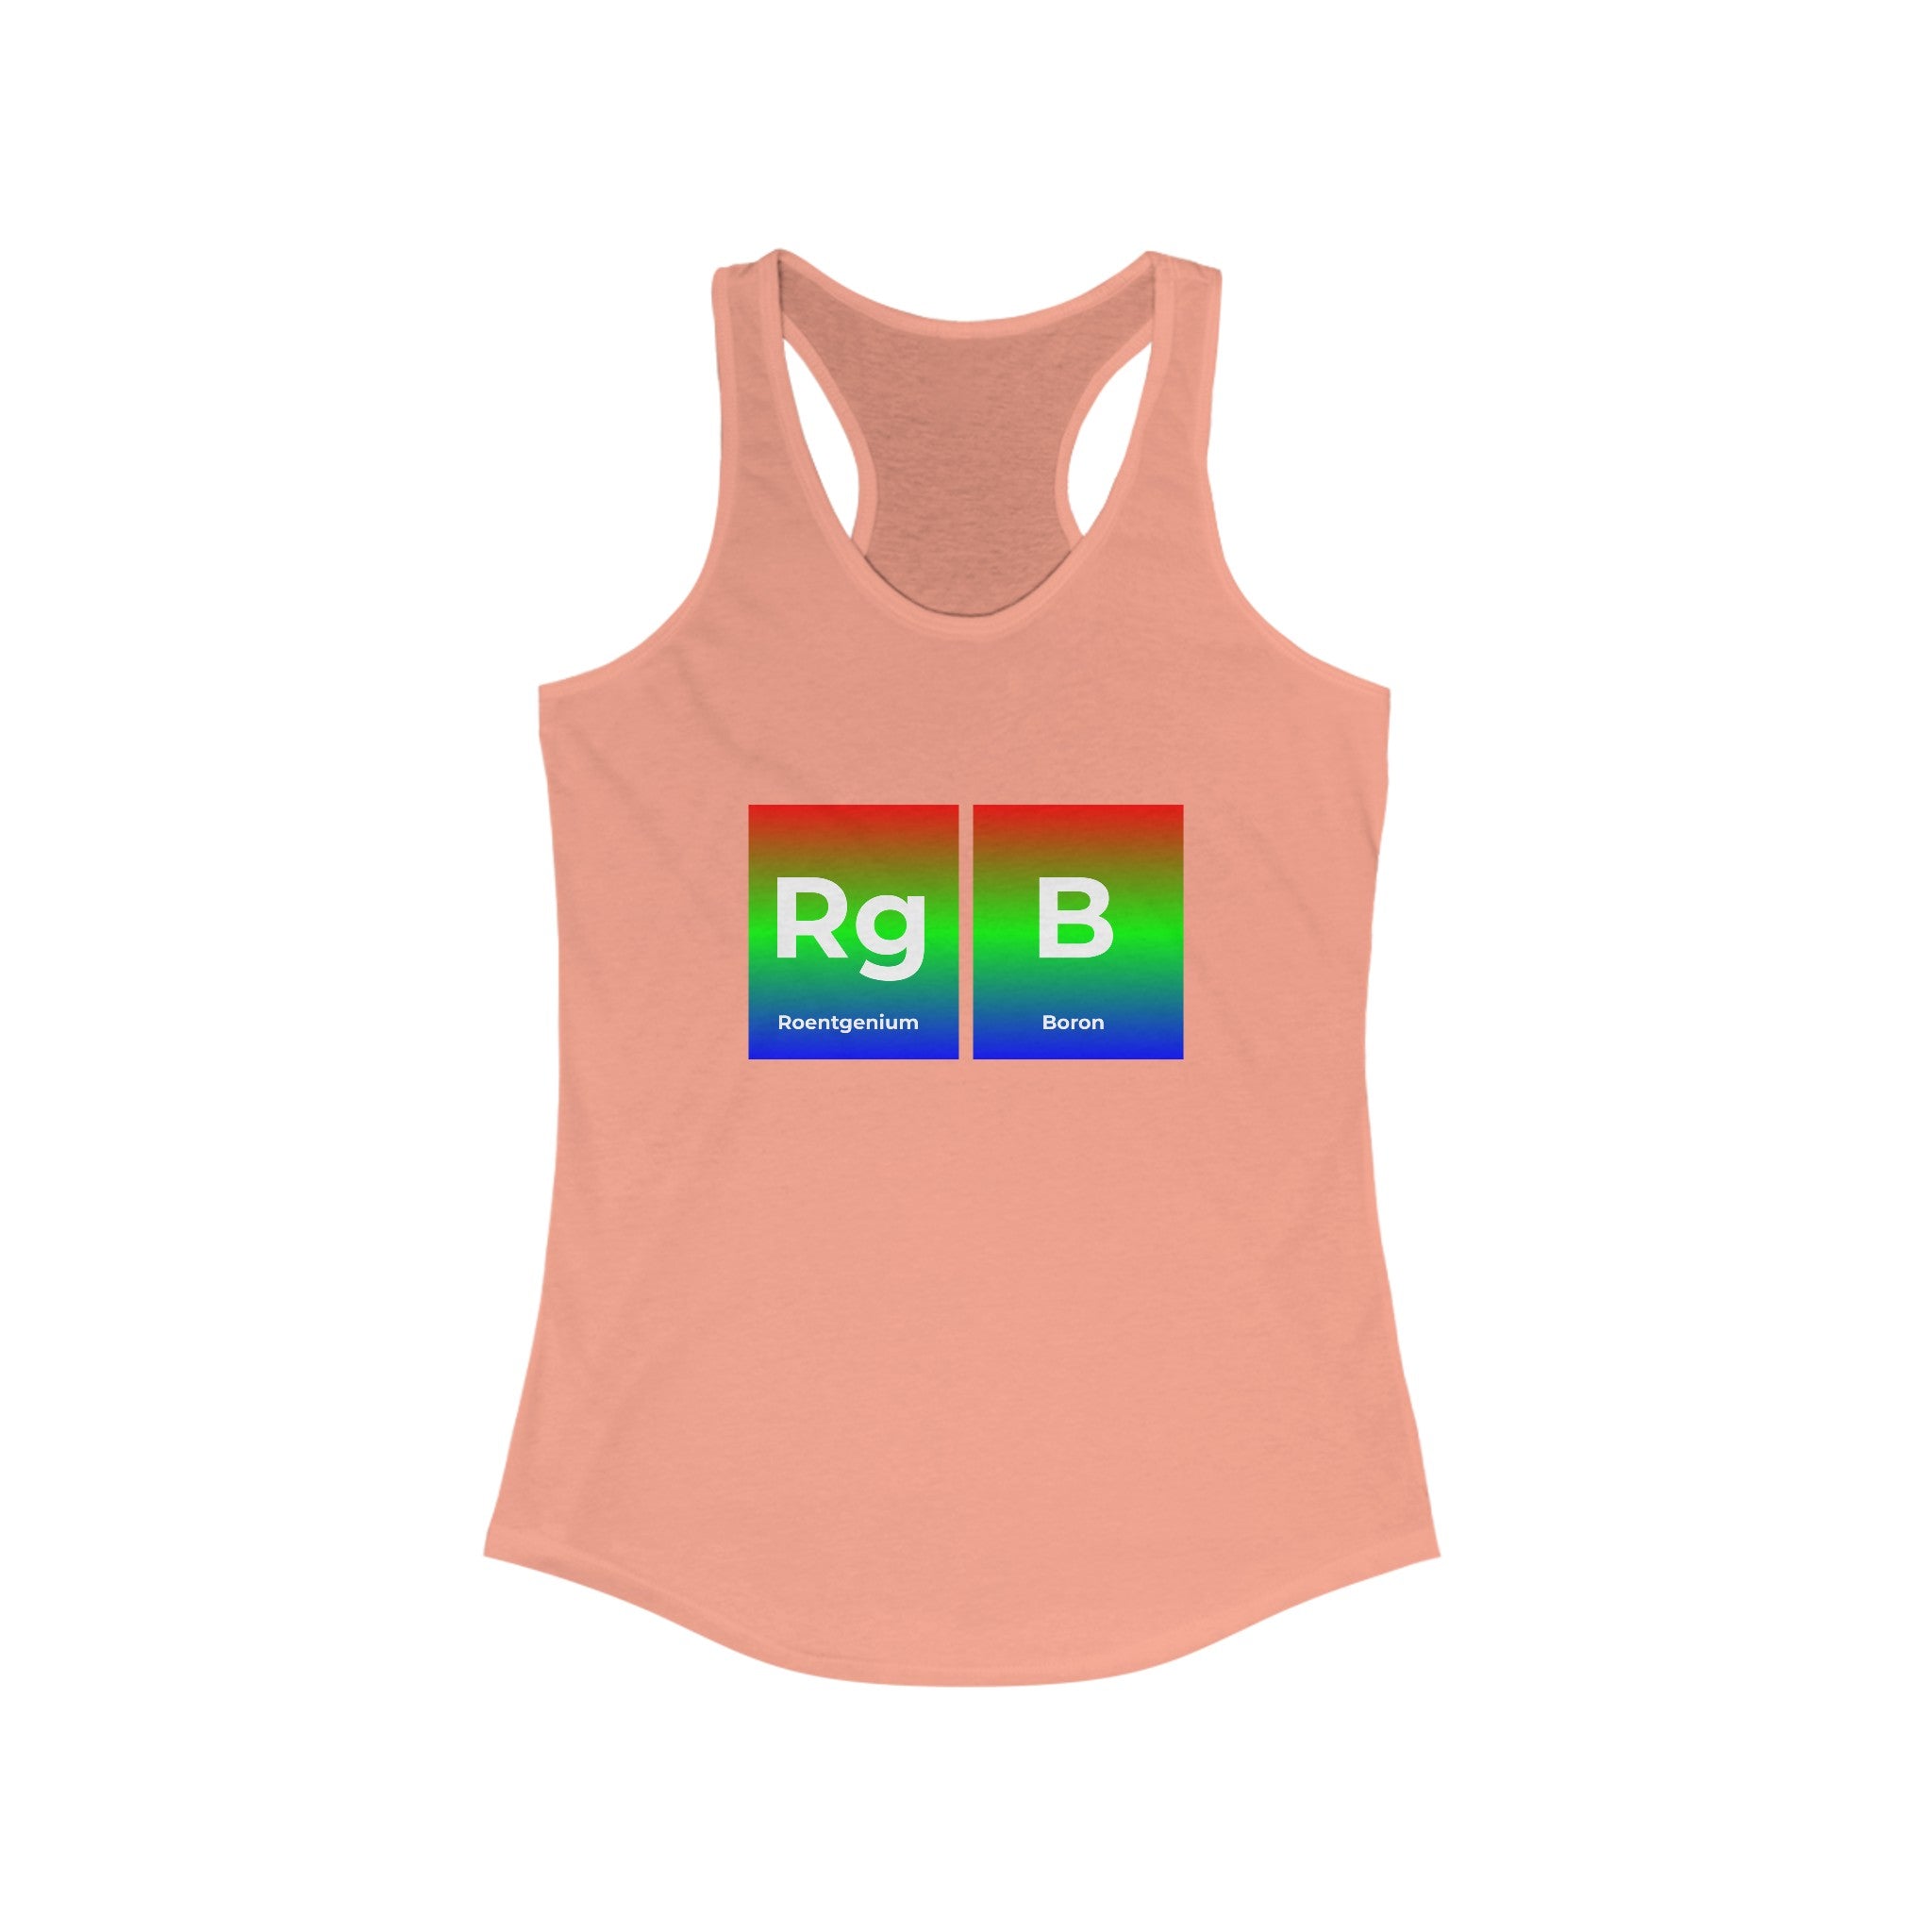 RG-B - Women's Racerback Tank featuring a periodic table-style design with elements "Rg" for Roentgenium and "B" for Boron, on a high-quality background transitioning from red to green to blue. Perfect for an active lifestyle.